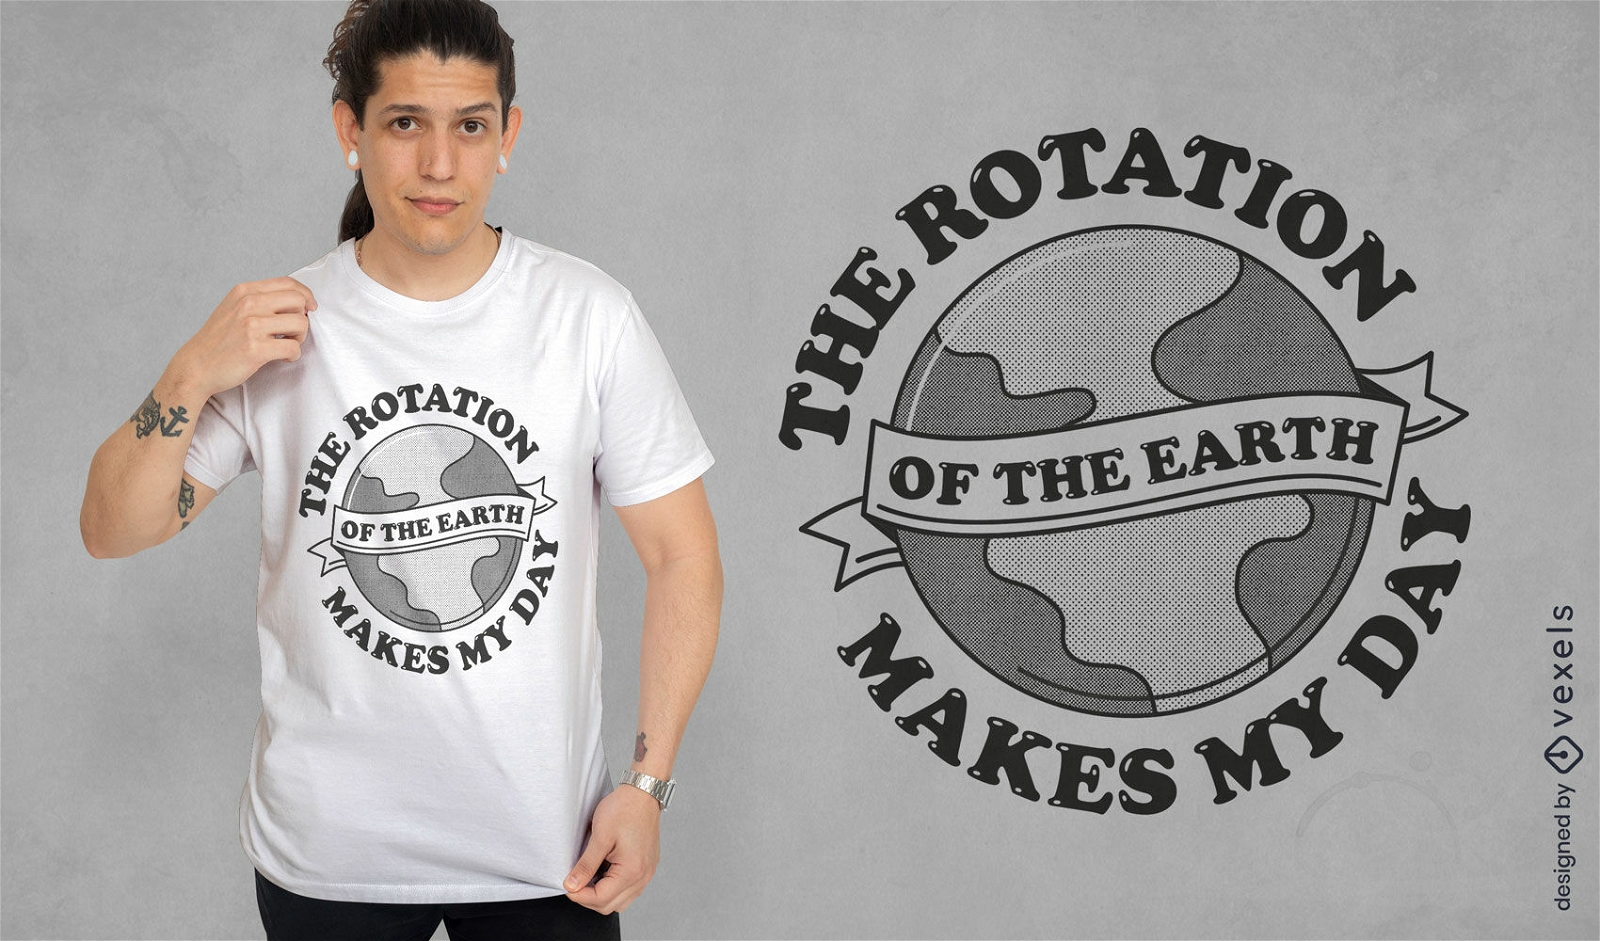 Planet earth in space t-shirt design